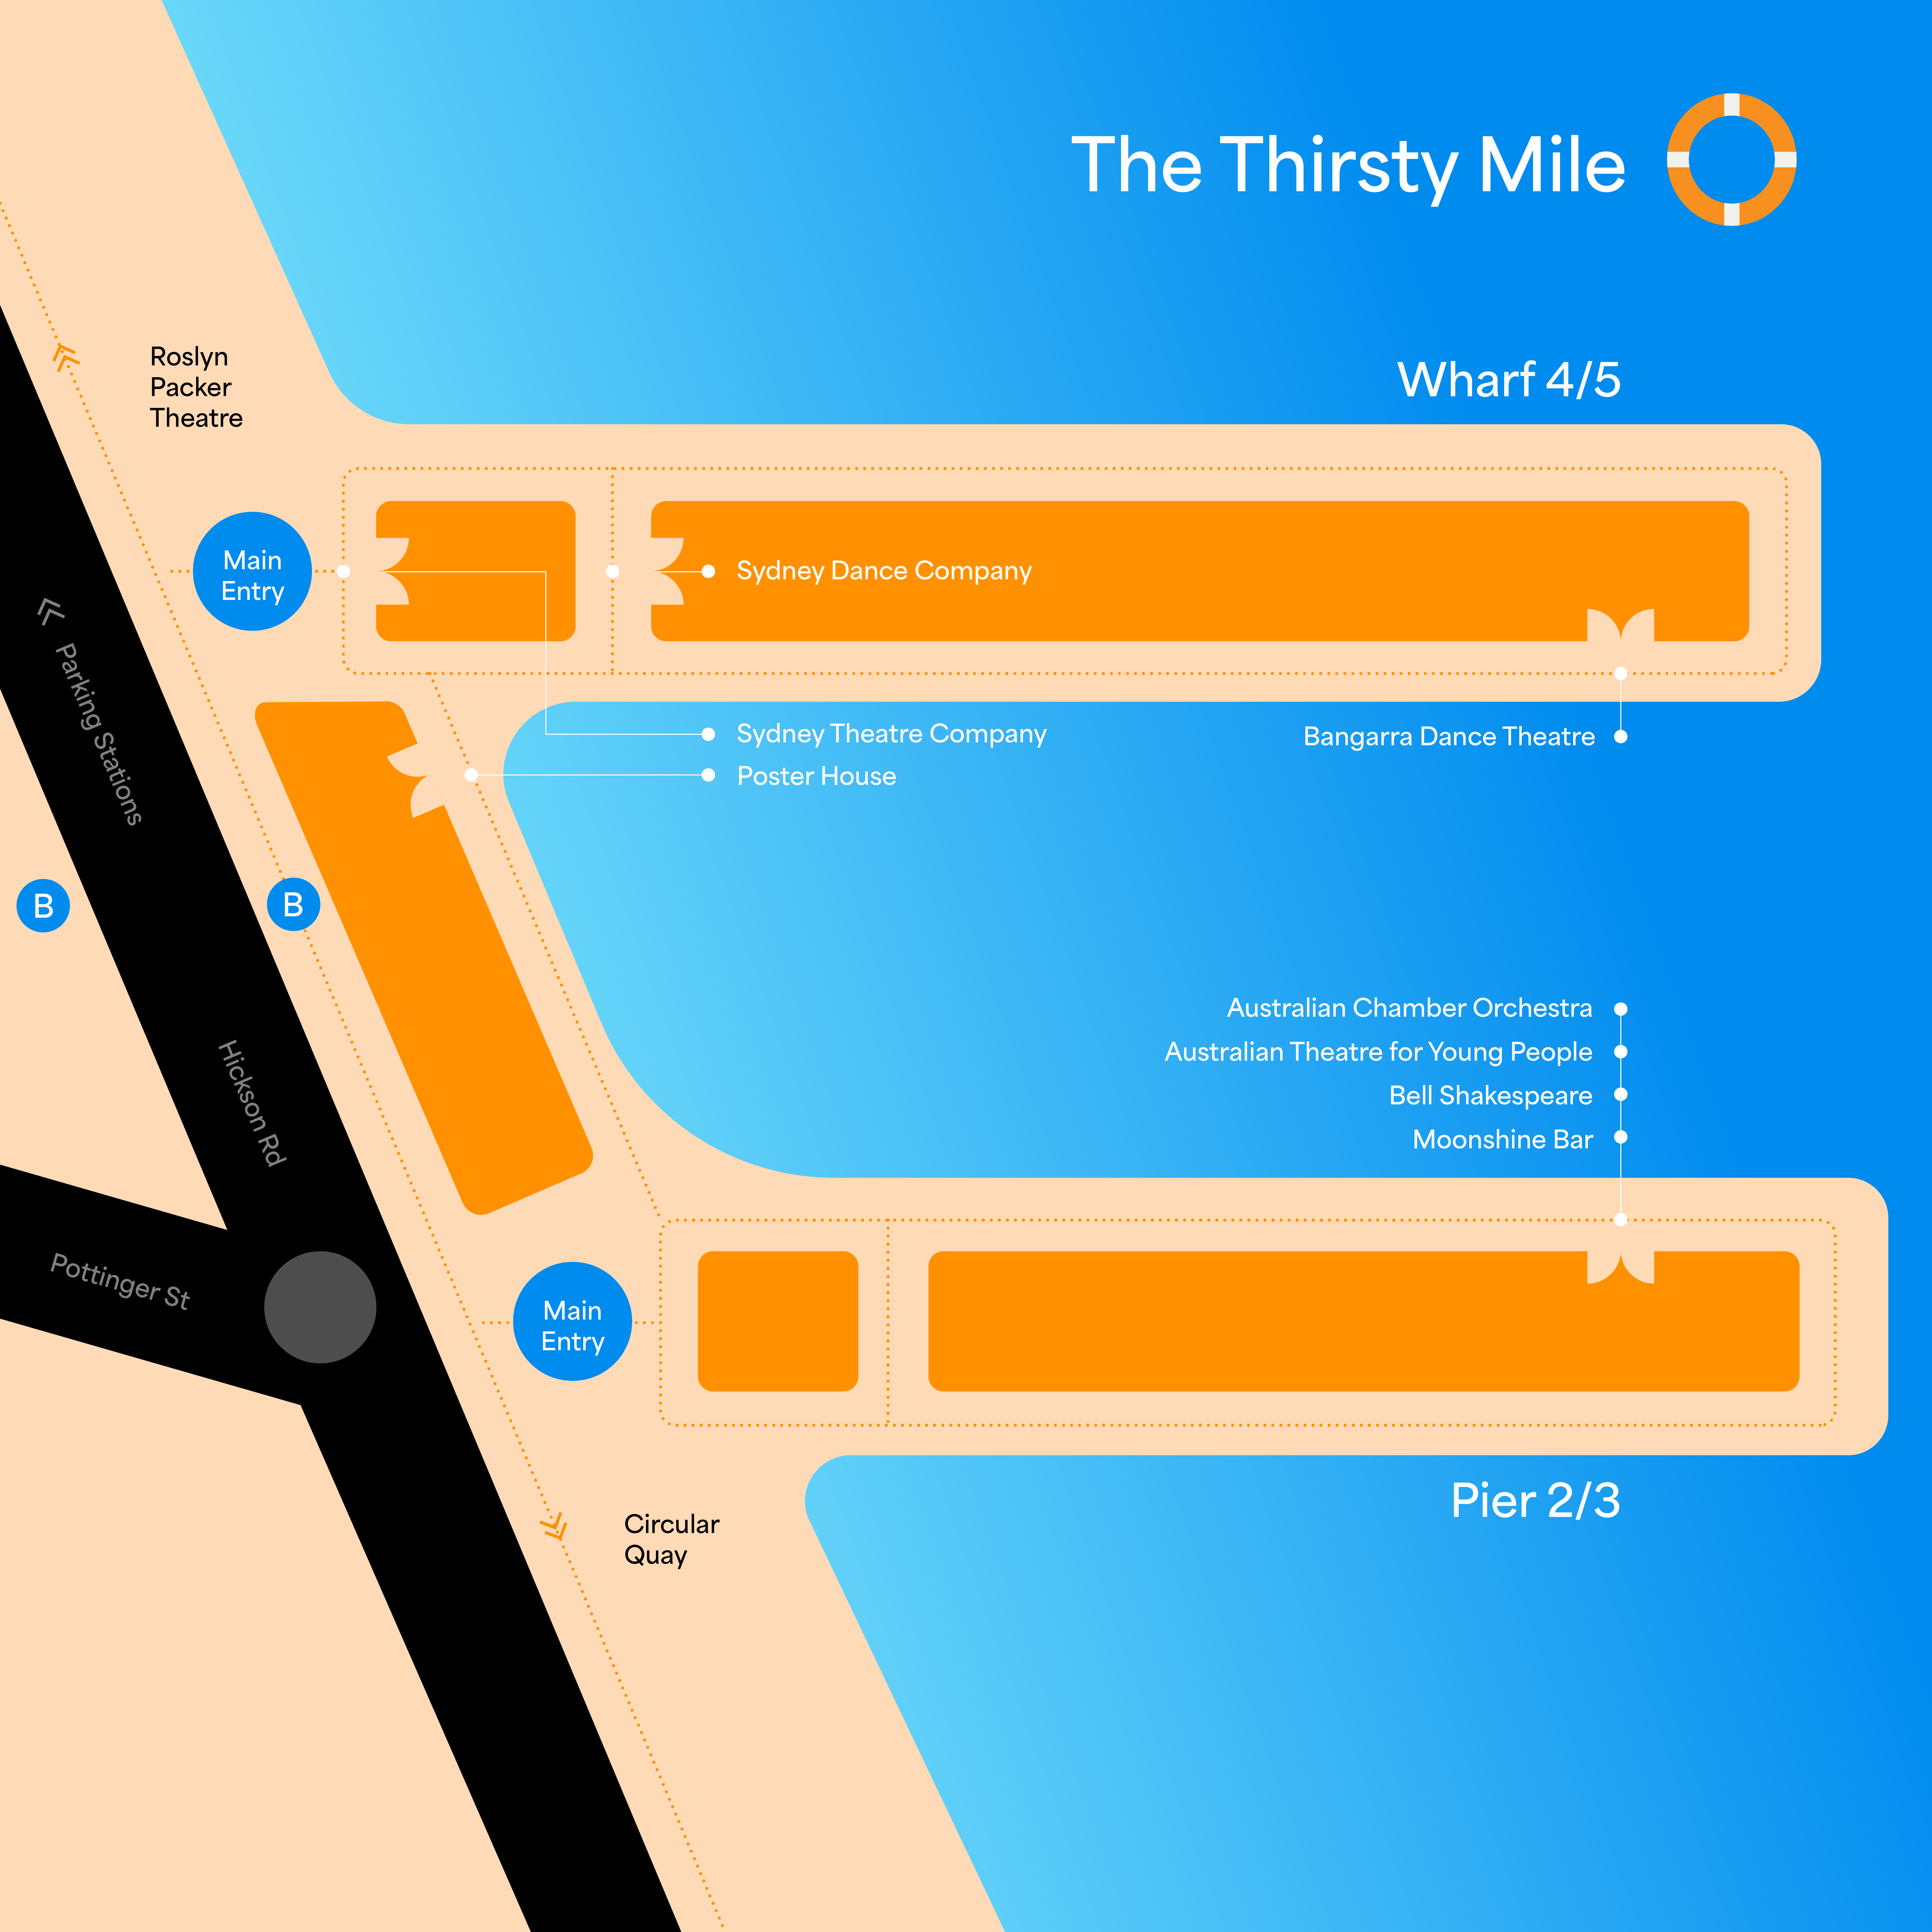 Map of Thirsty Mile venues